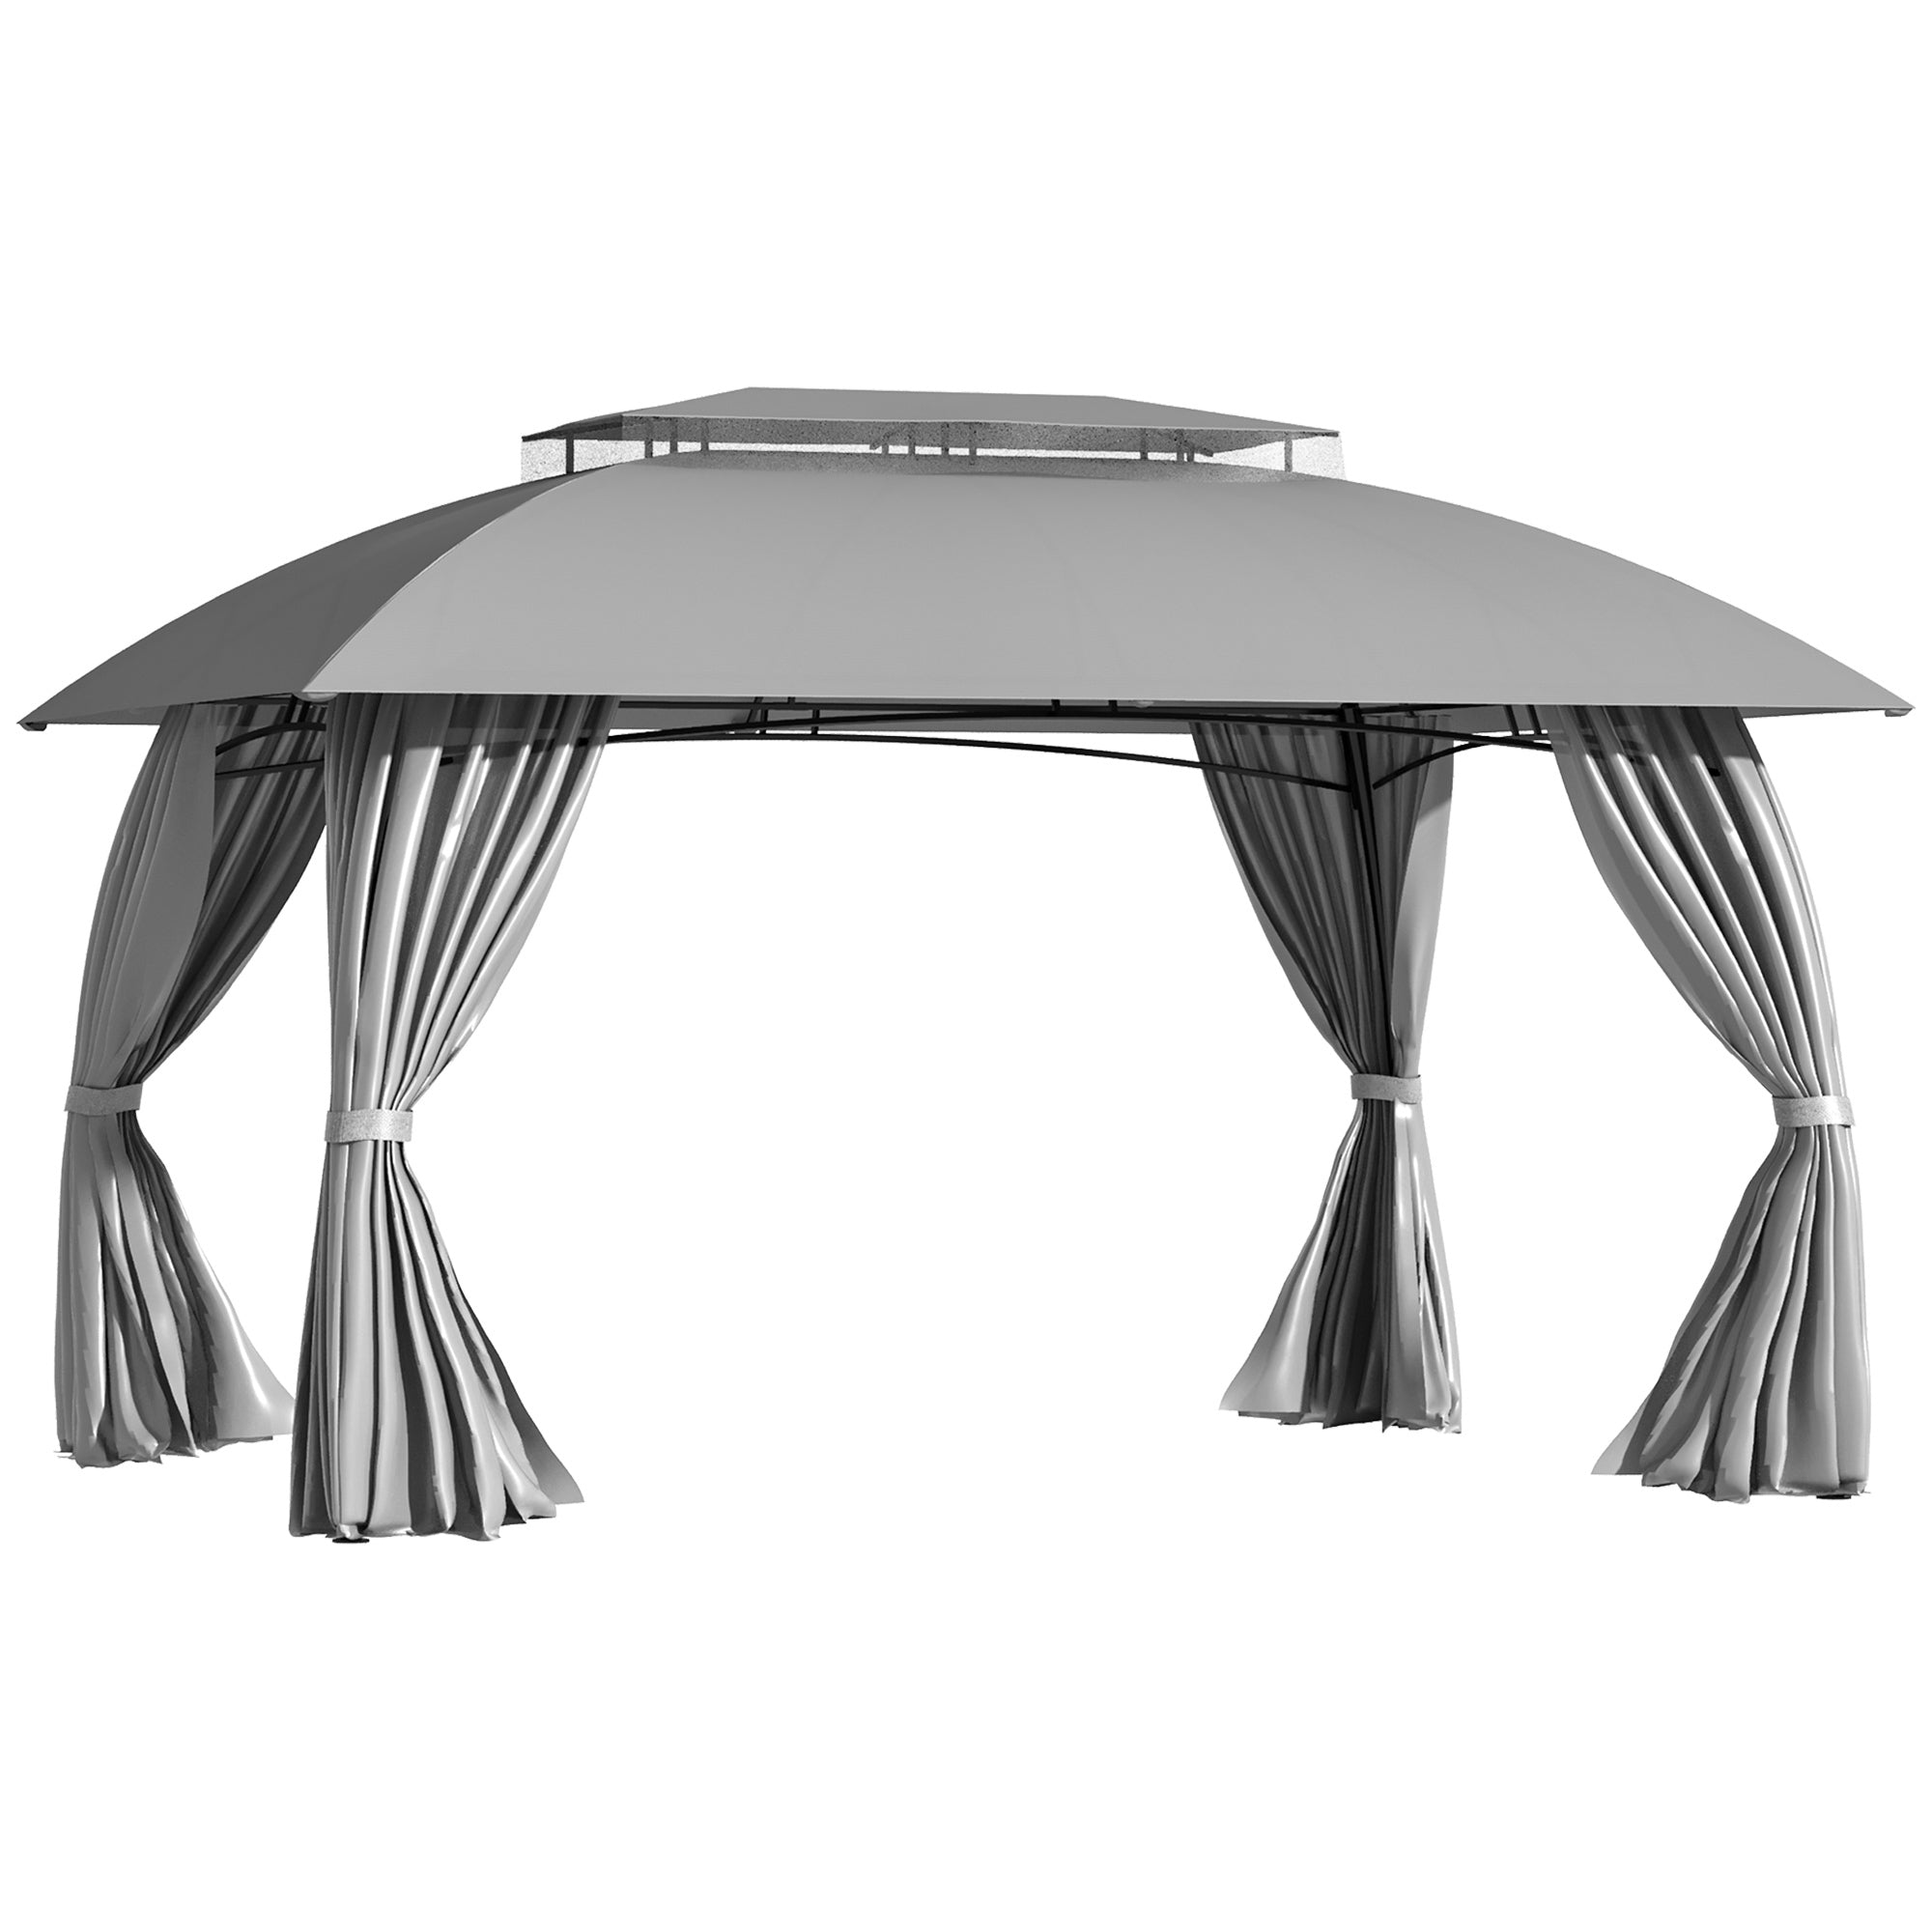 10' x 13' Patio Gazebo Canopy, Double Vented Roof gray-steel